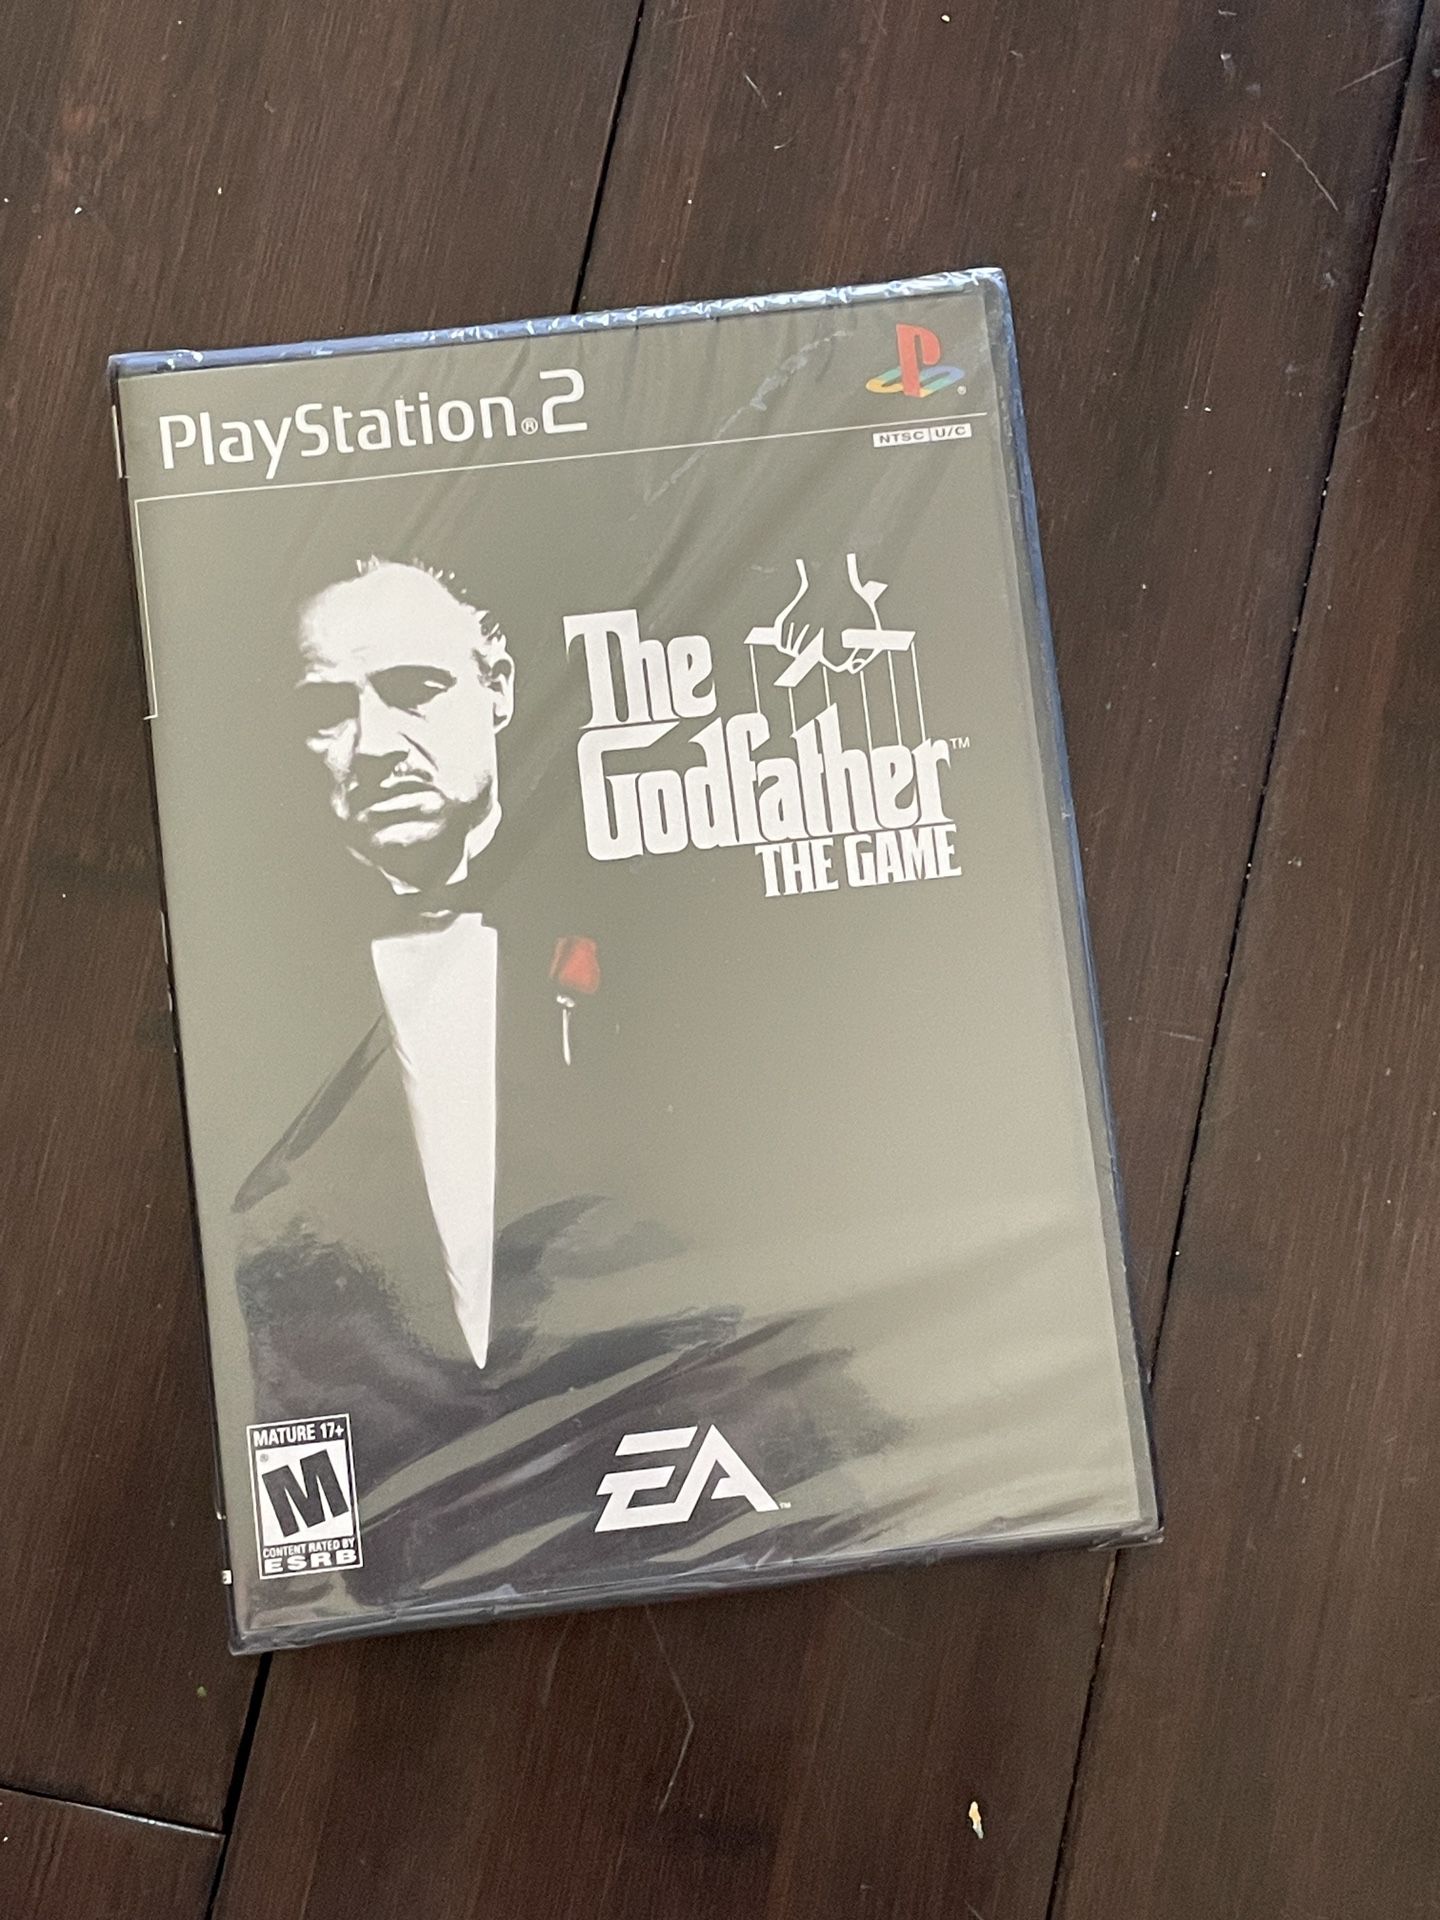 Godfather The Game PS2 -factory Sealed